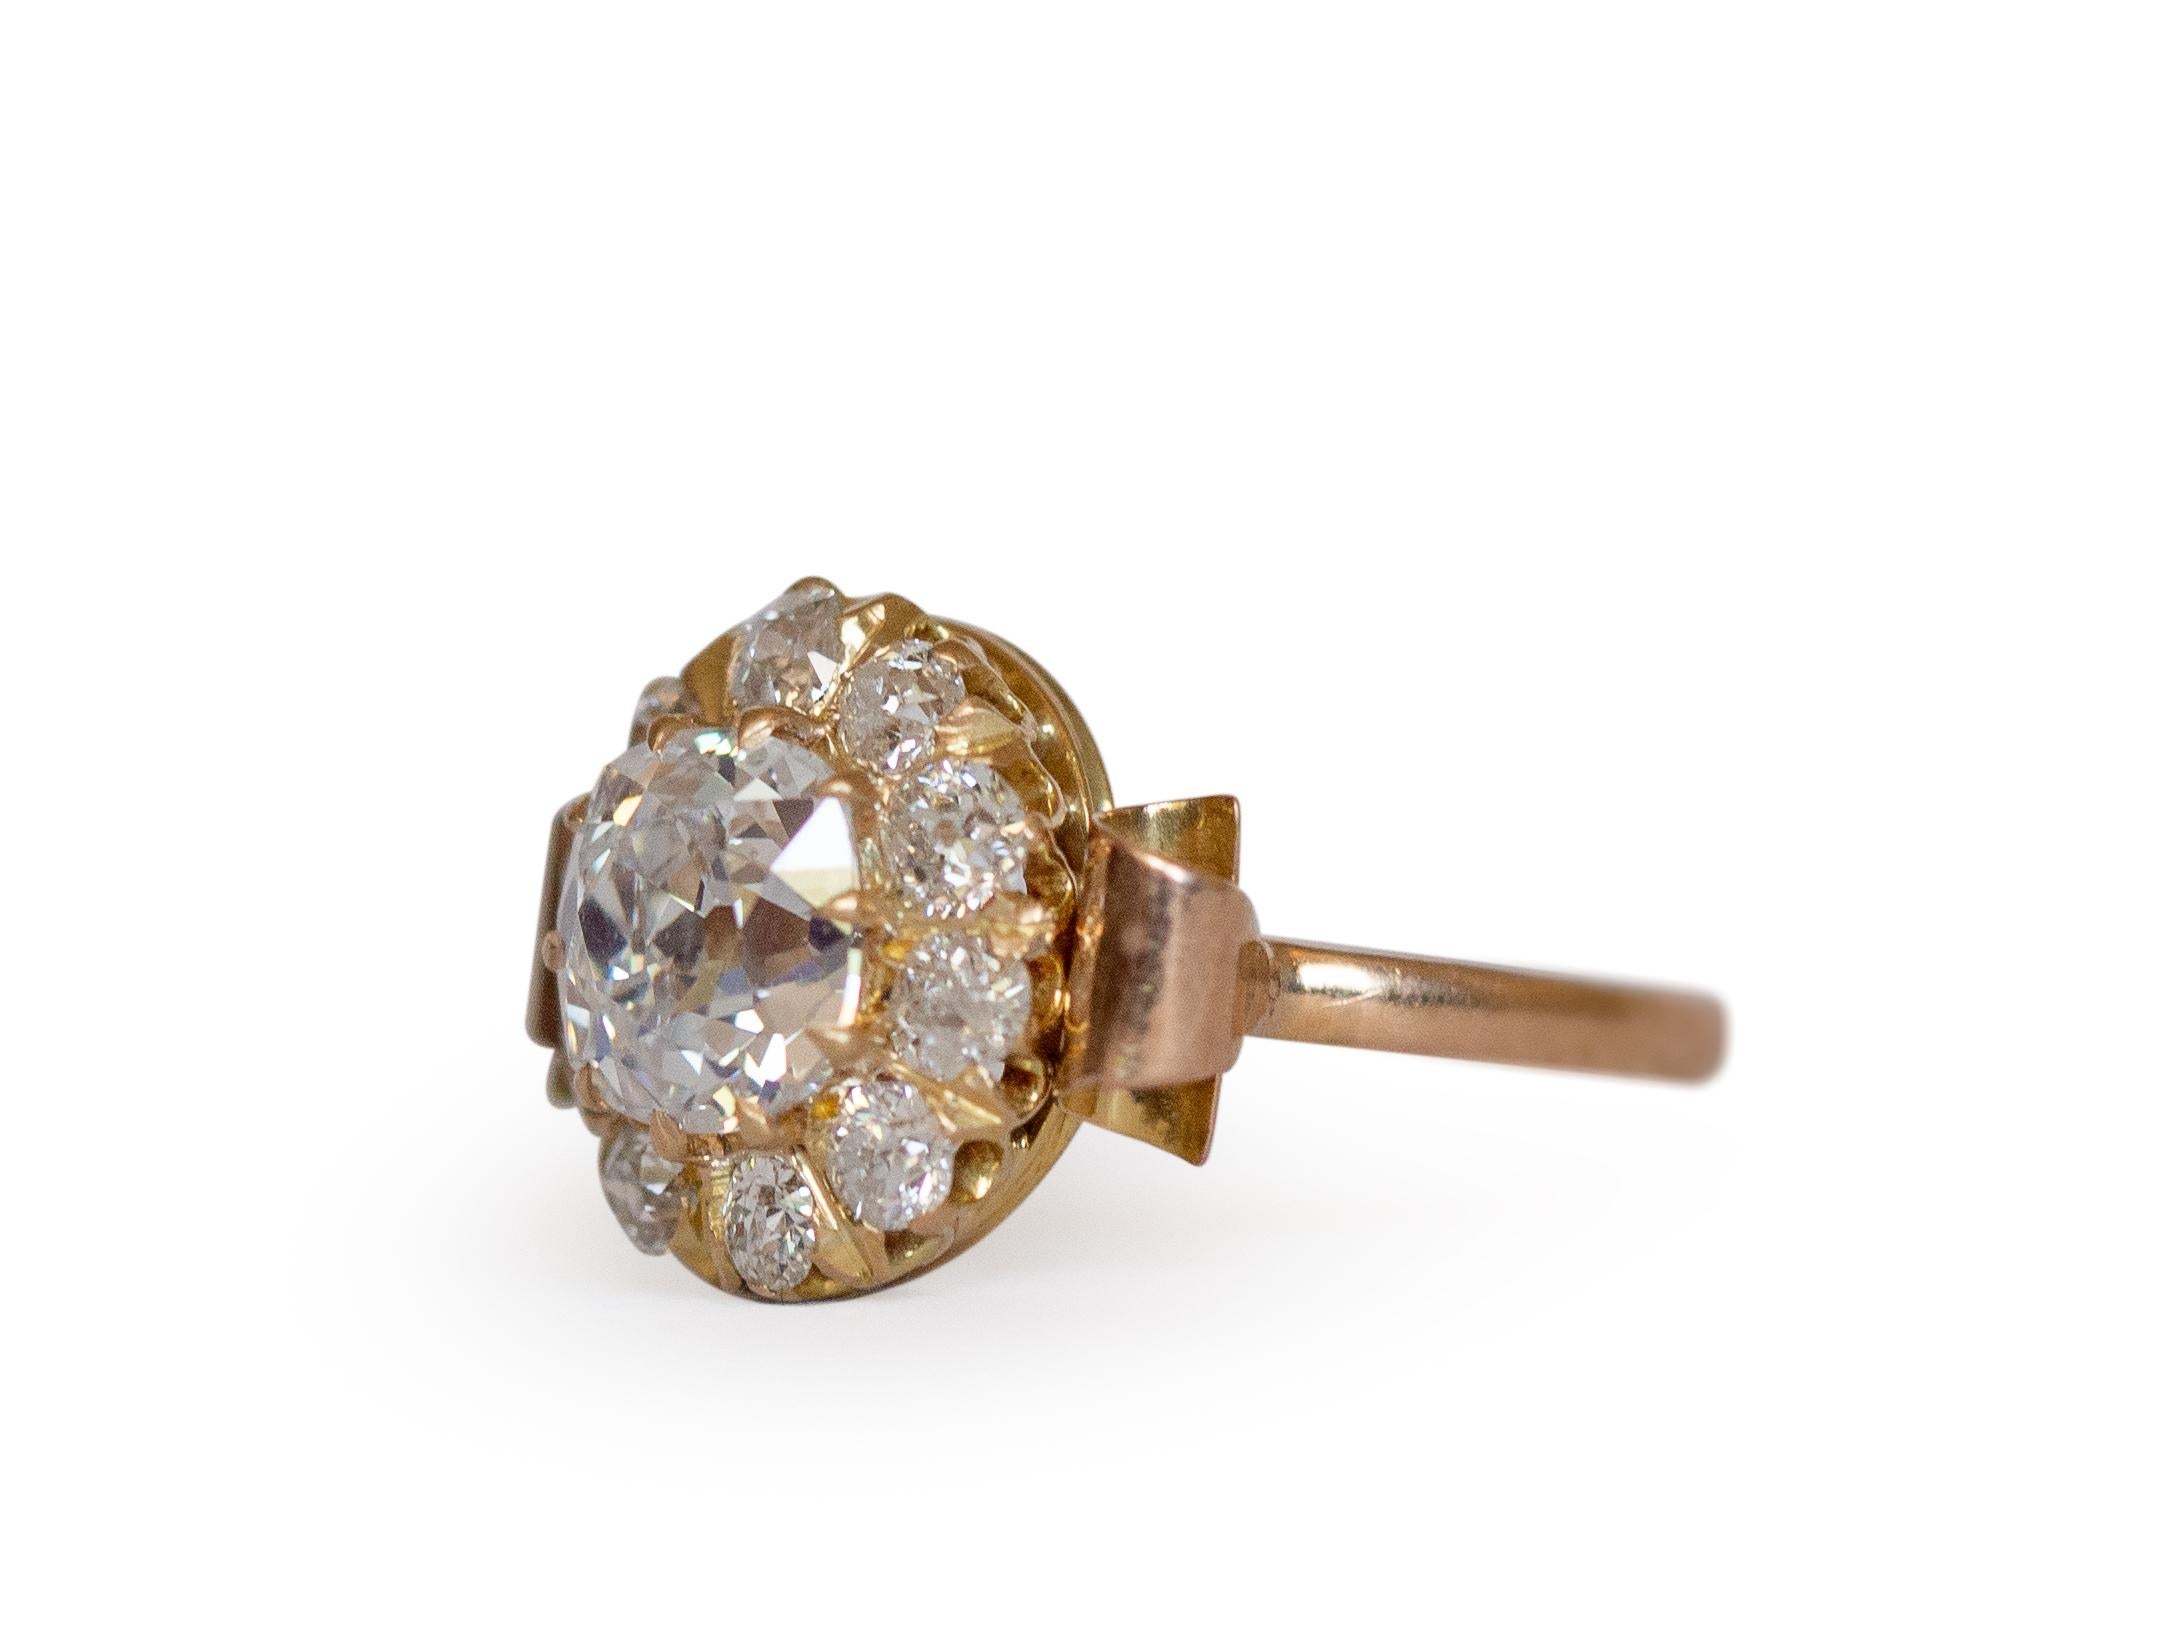 Ring Size: 6
Metal Type: 14K Yellow Gold [Hallmarked, and Tested]
Weight:  3 grams

Center Diamond Details:
GIA REPORT #: 5211060867
Weight: 1.11 carat
Cut: Old Mine Brilliant
Color: G
Clarity: SI2

Side Diamond Details:
Weight: .25 carat, total